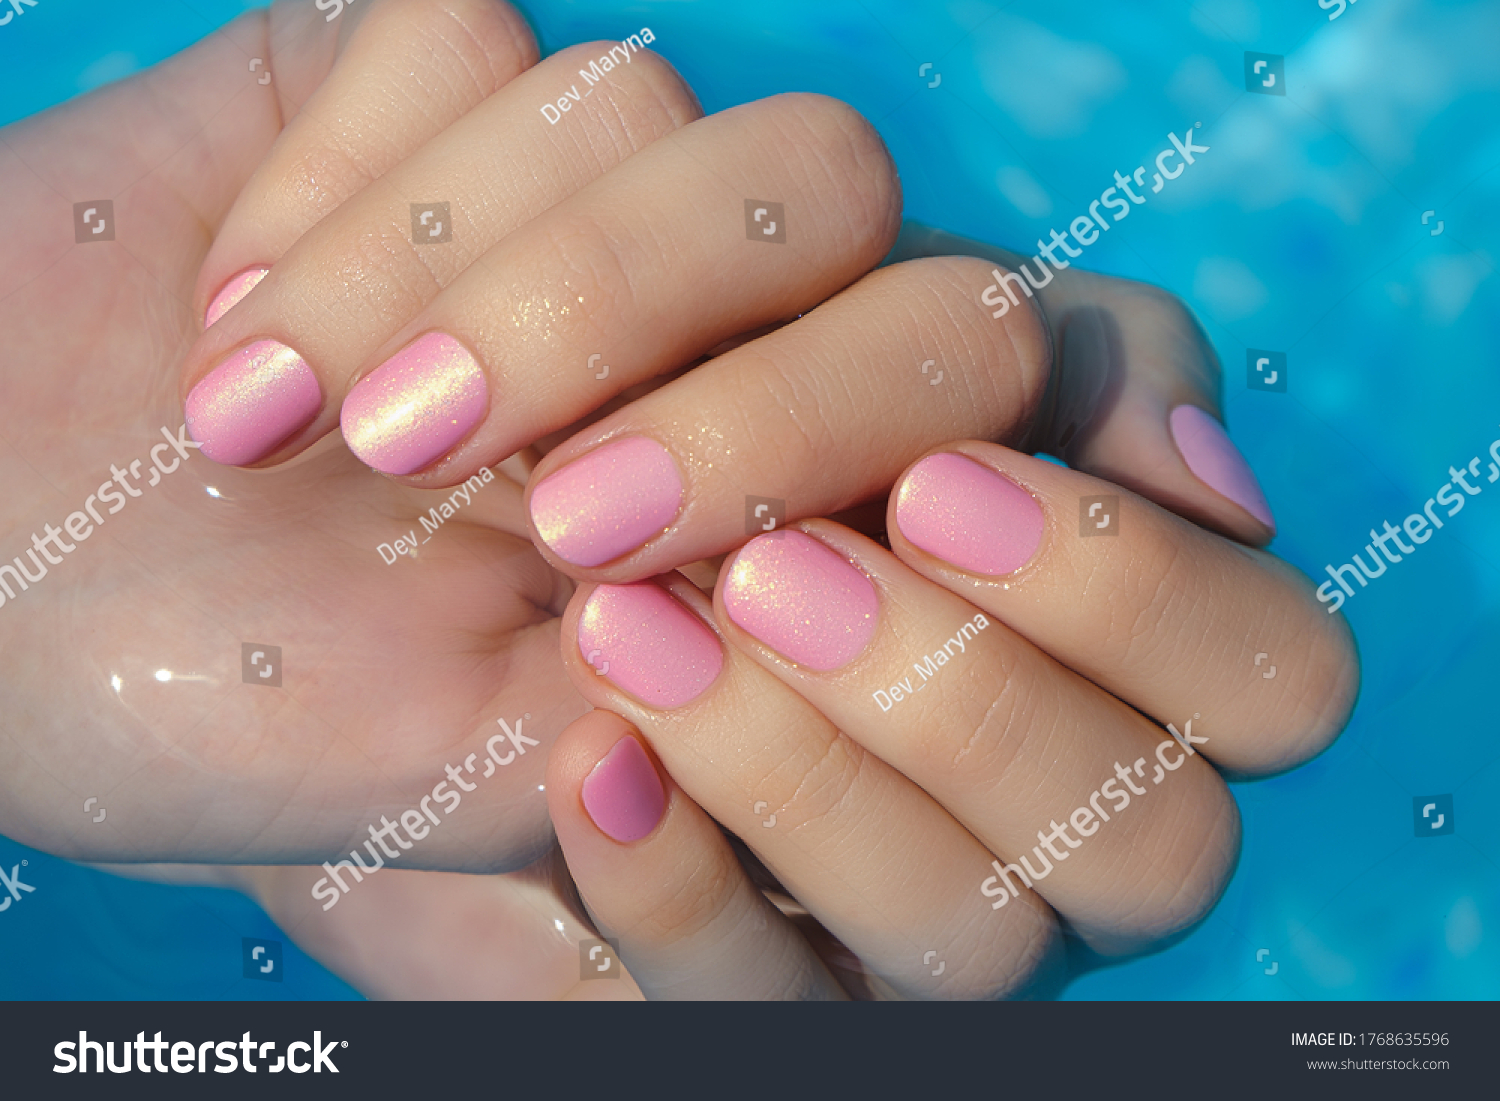 7. Coffin Nails with Pink and White Stripes - wide 5